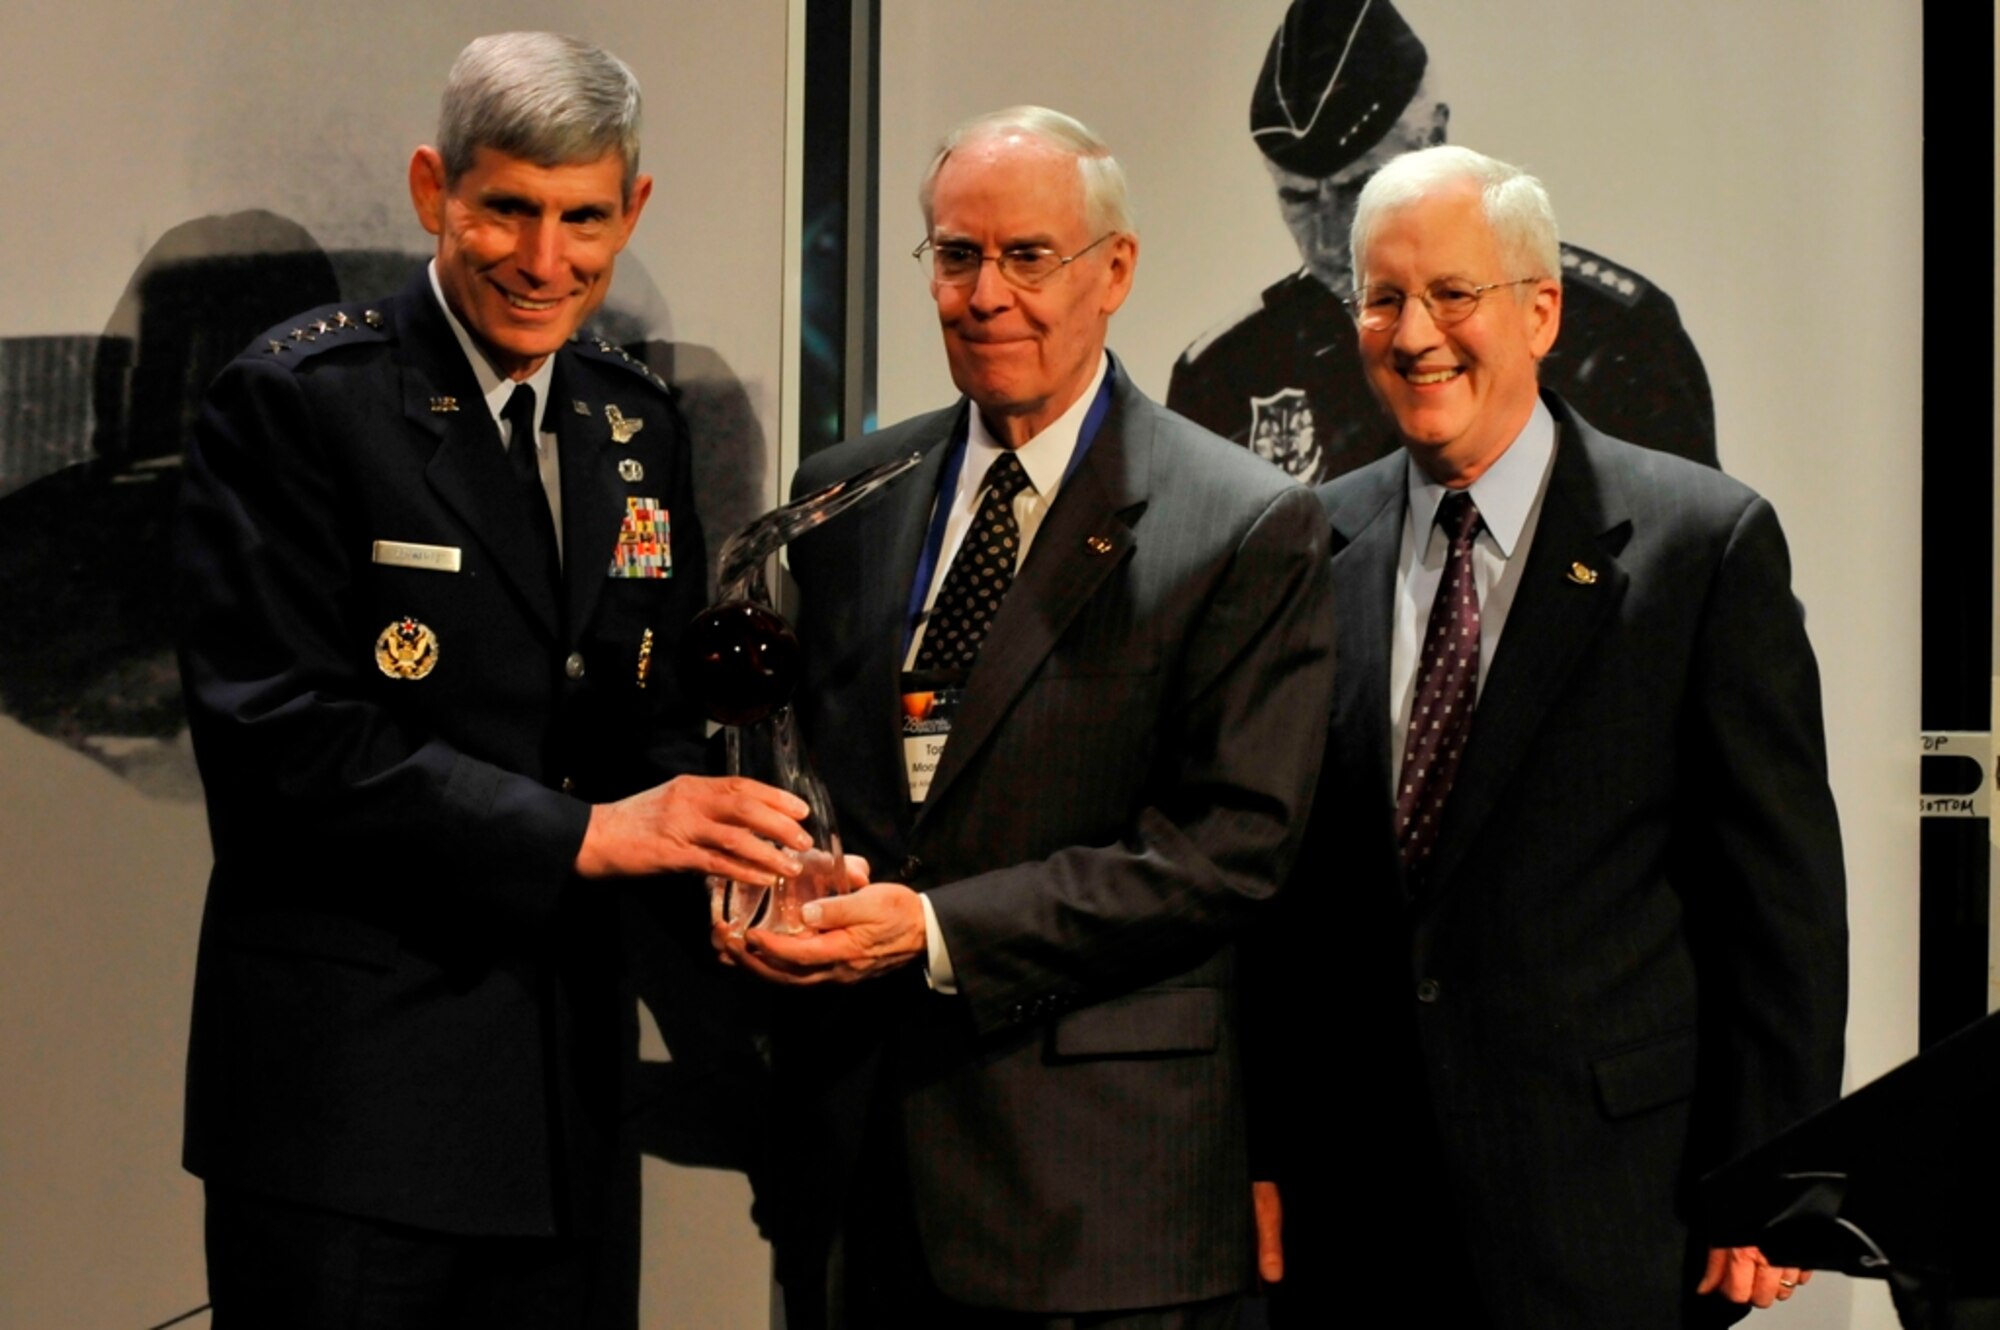 Air Force Chief of Staff Gen. Norton Schwartz presents retired Gen. Thomas S. Moorman Jr. (center) with the Gen. James E. Hill Lifetime Space Achievement Award April 18, 2012, at the 28th National Space Symposium in Colorado Springs, Colo. With them is Martin Faga, chairman of the board for the Space Foundation. 